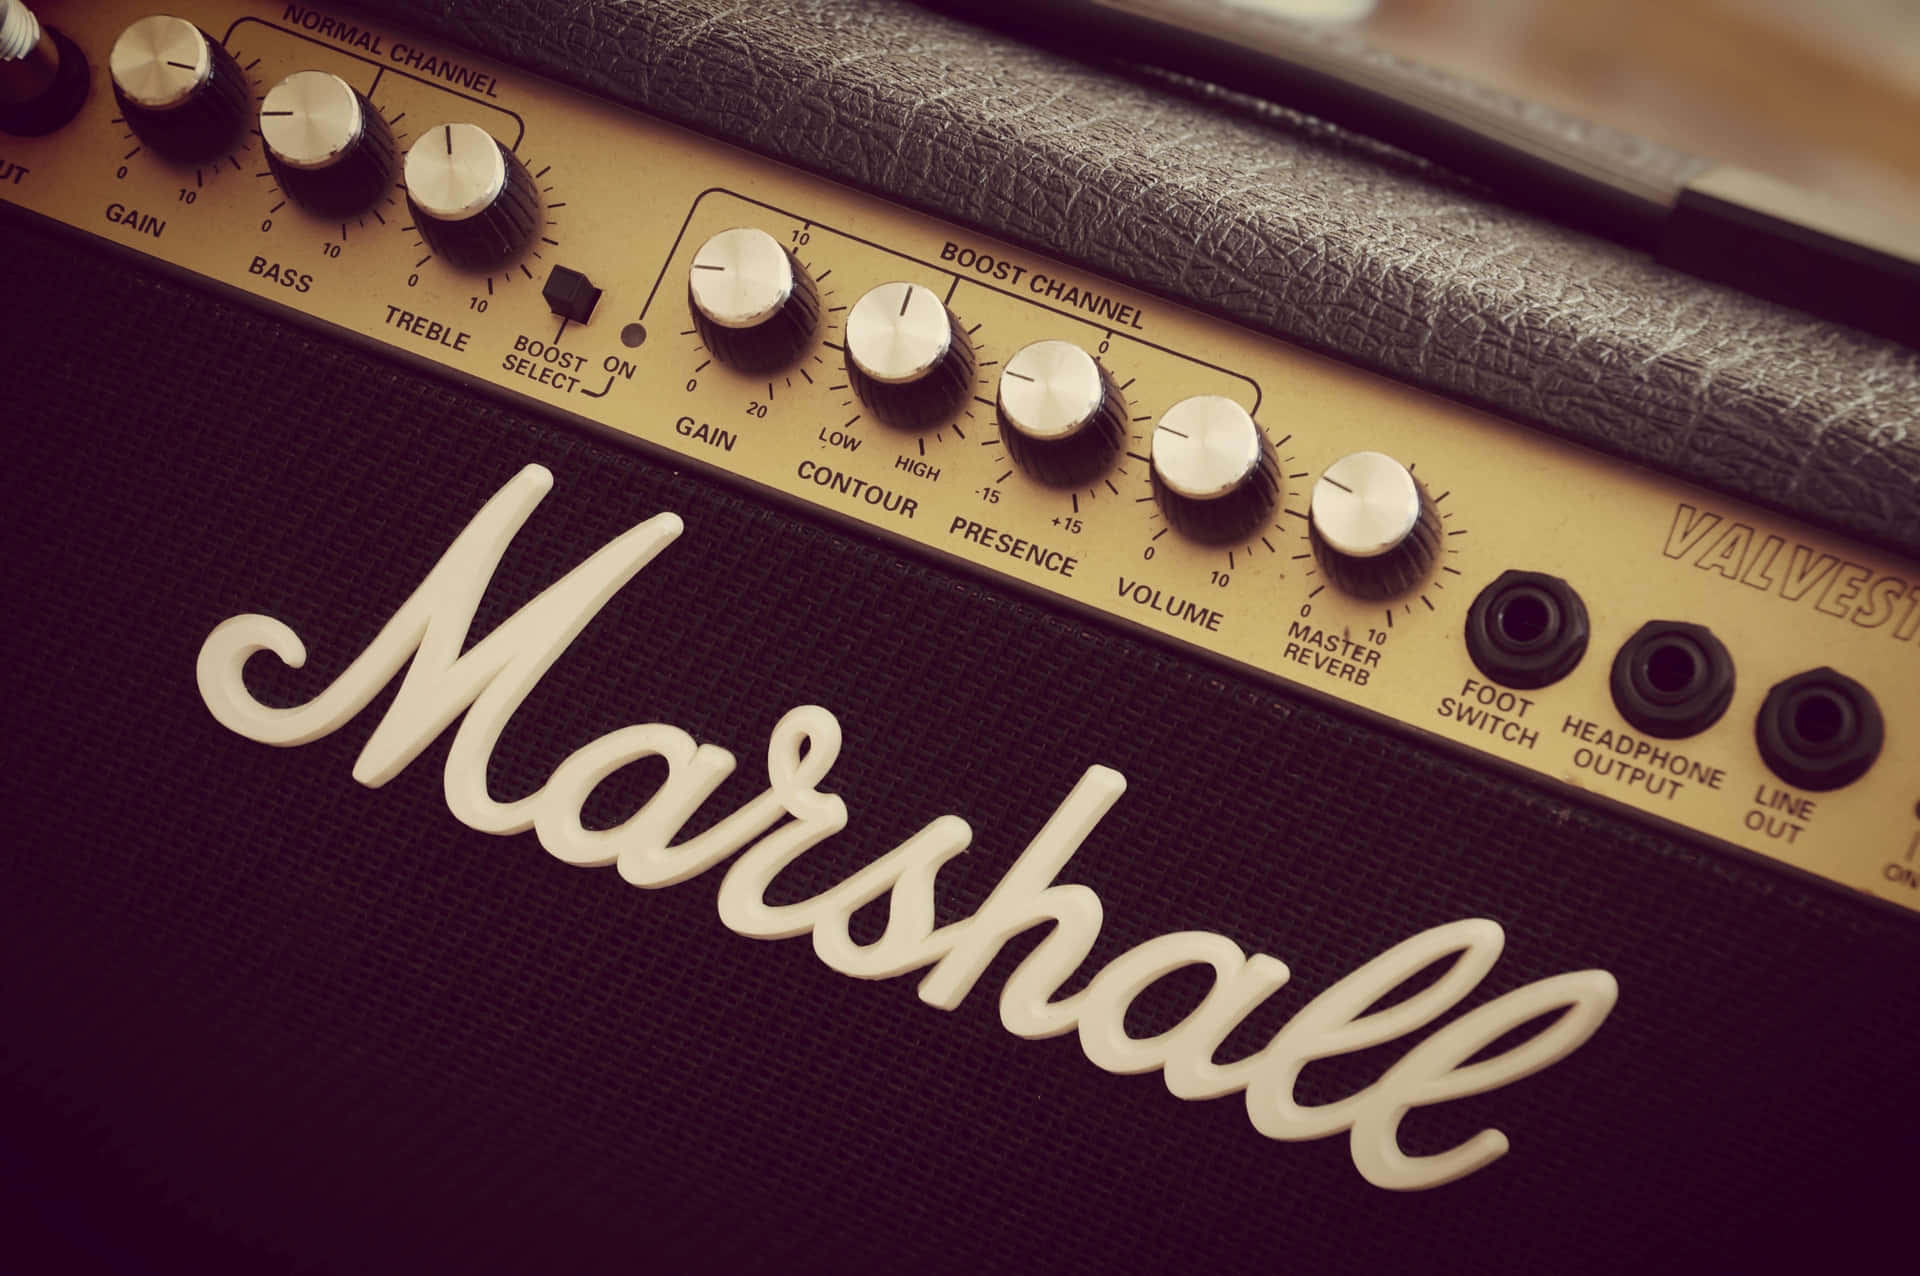 Marshall Ms-100 - Acoustic Guitar Amp